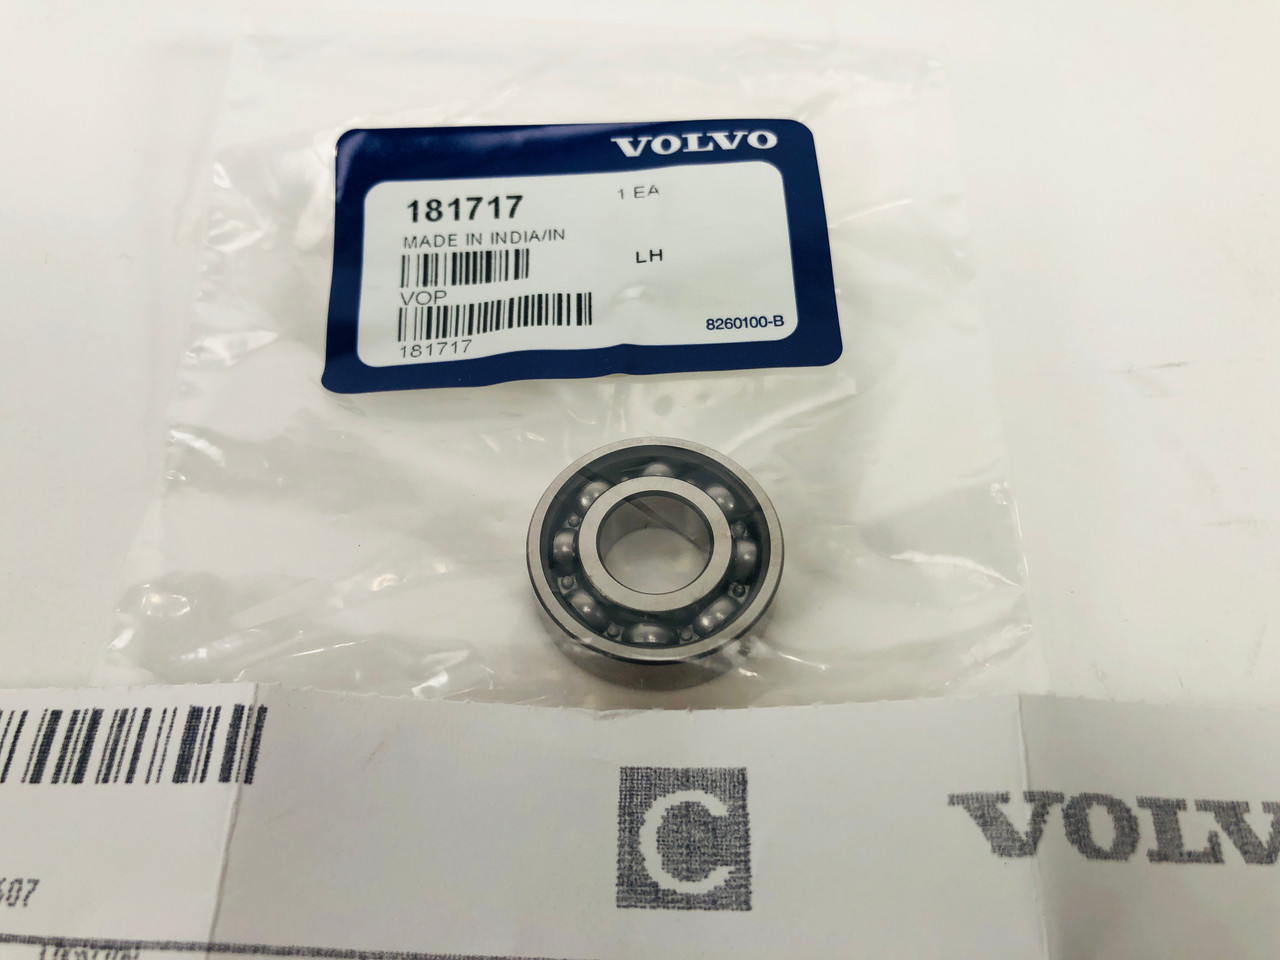 $29.99* GENUINE VOLVO no tax* BALL BEARING 181717 *In Stock & Ready To Ship!